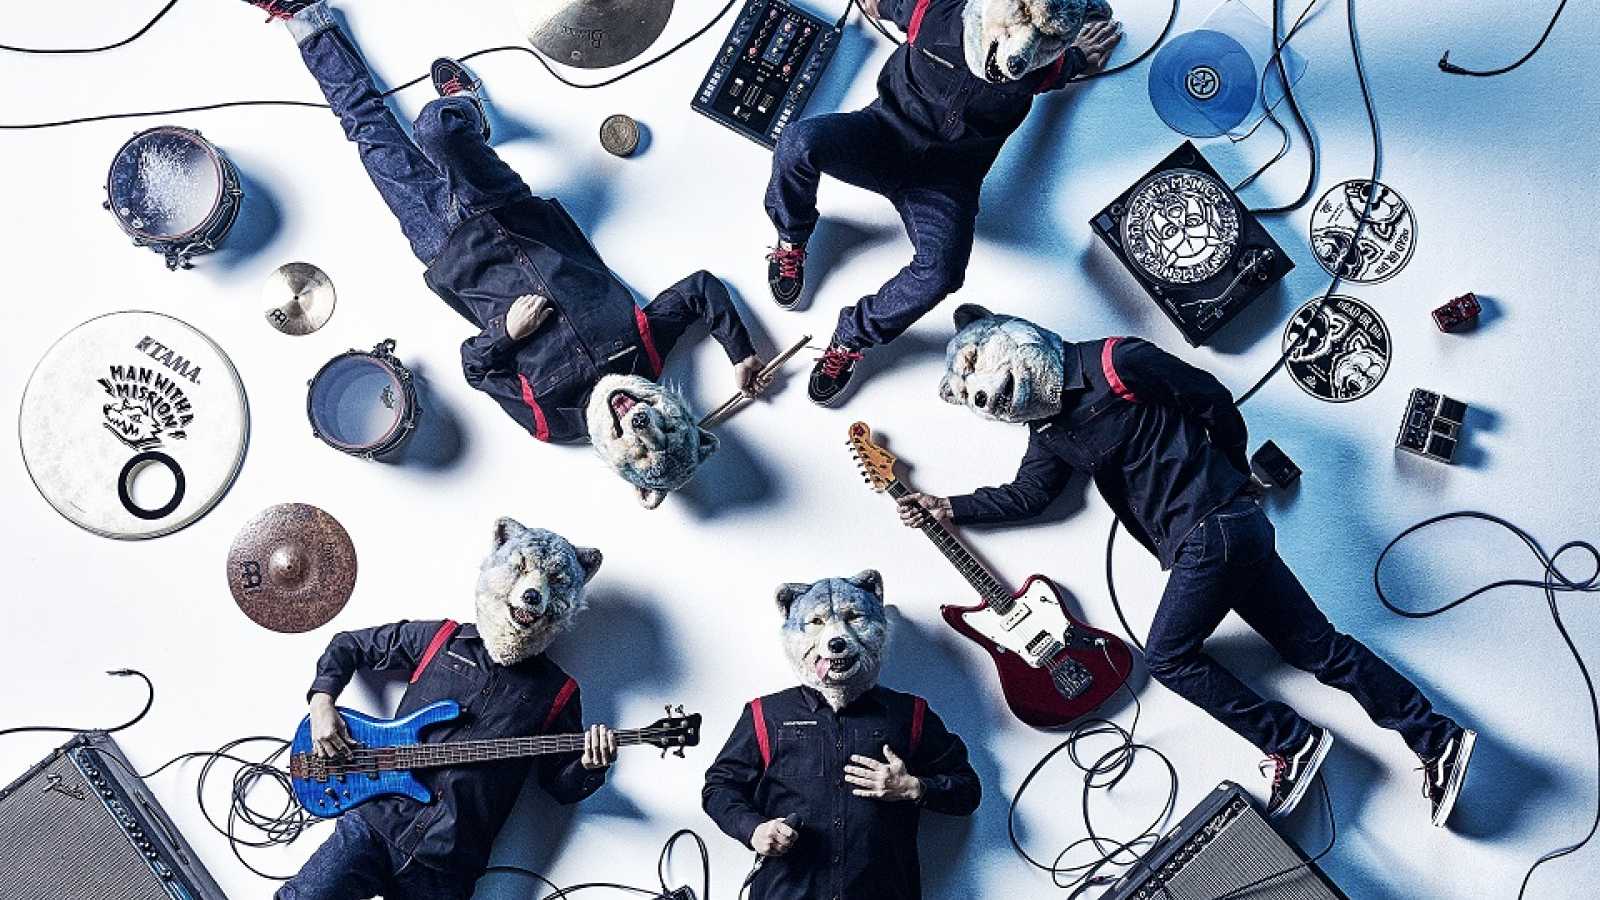 Nuevo EP de MAN WITH A MISSION © MAN WITH A MISSION. All rights reserved.